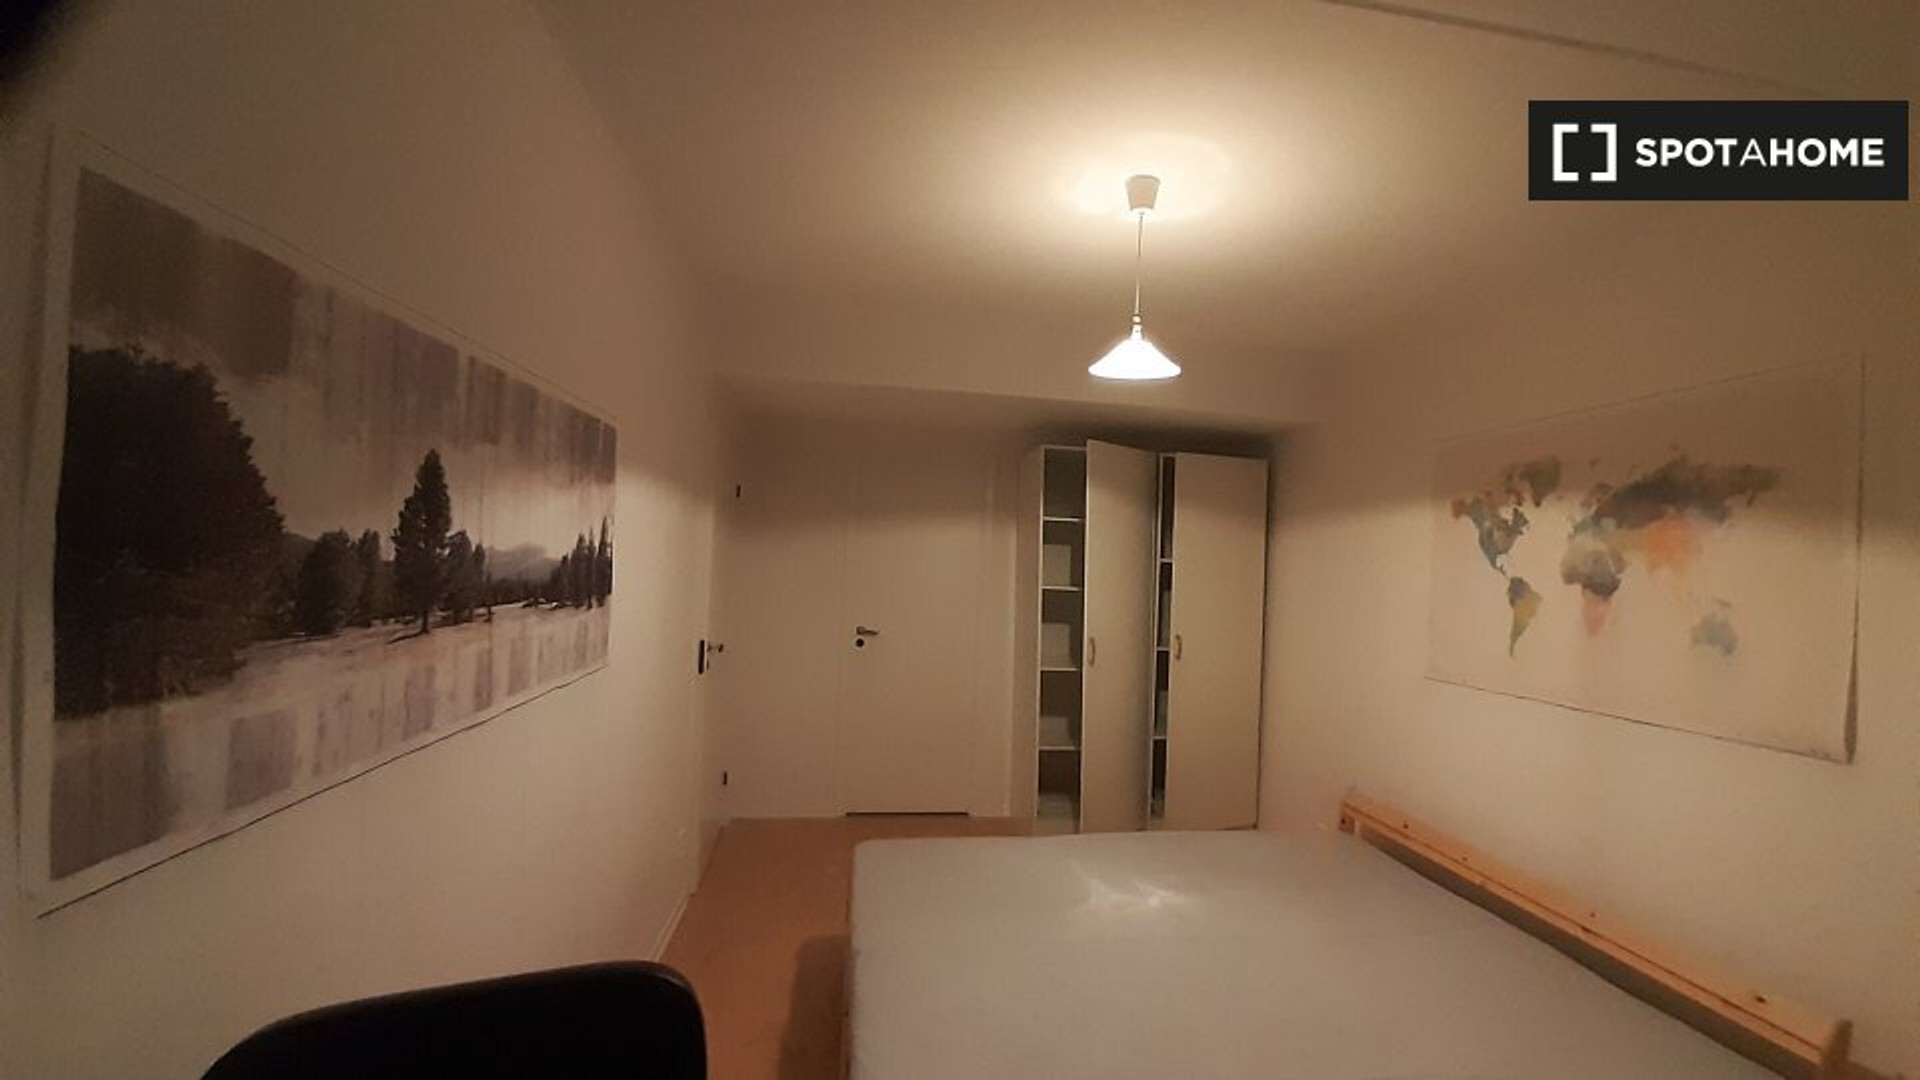 Room for rent with double bed Stockholm